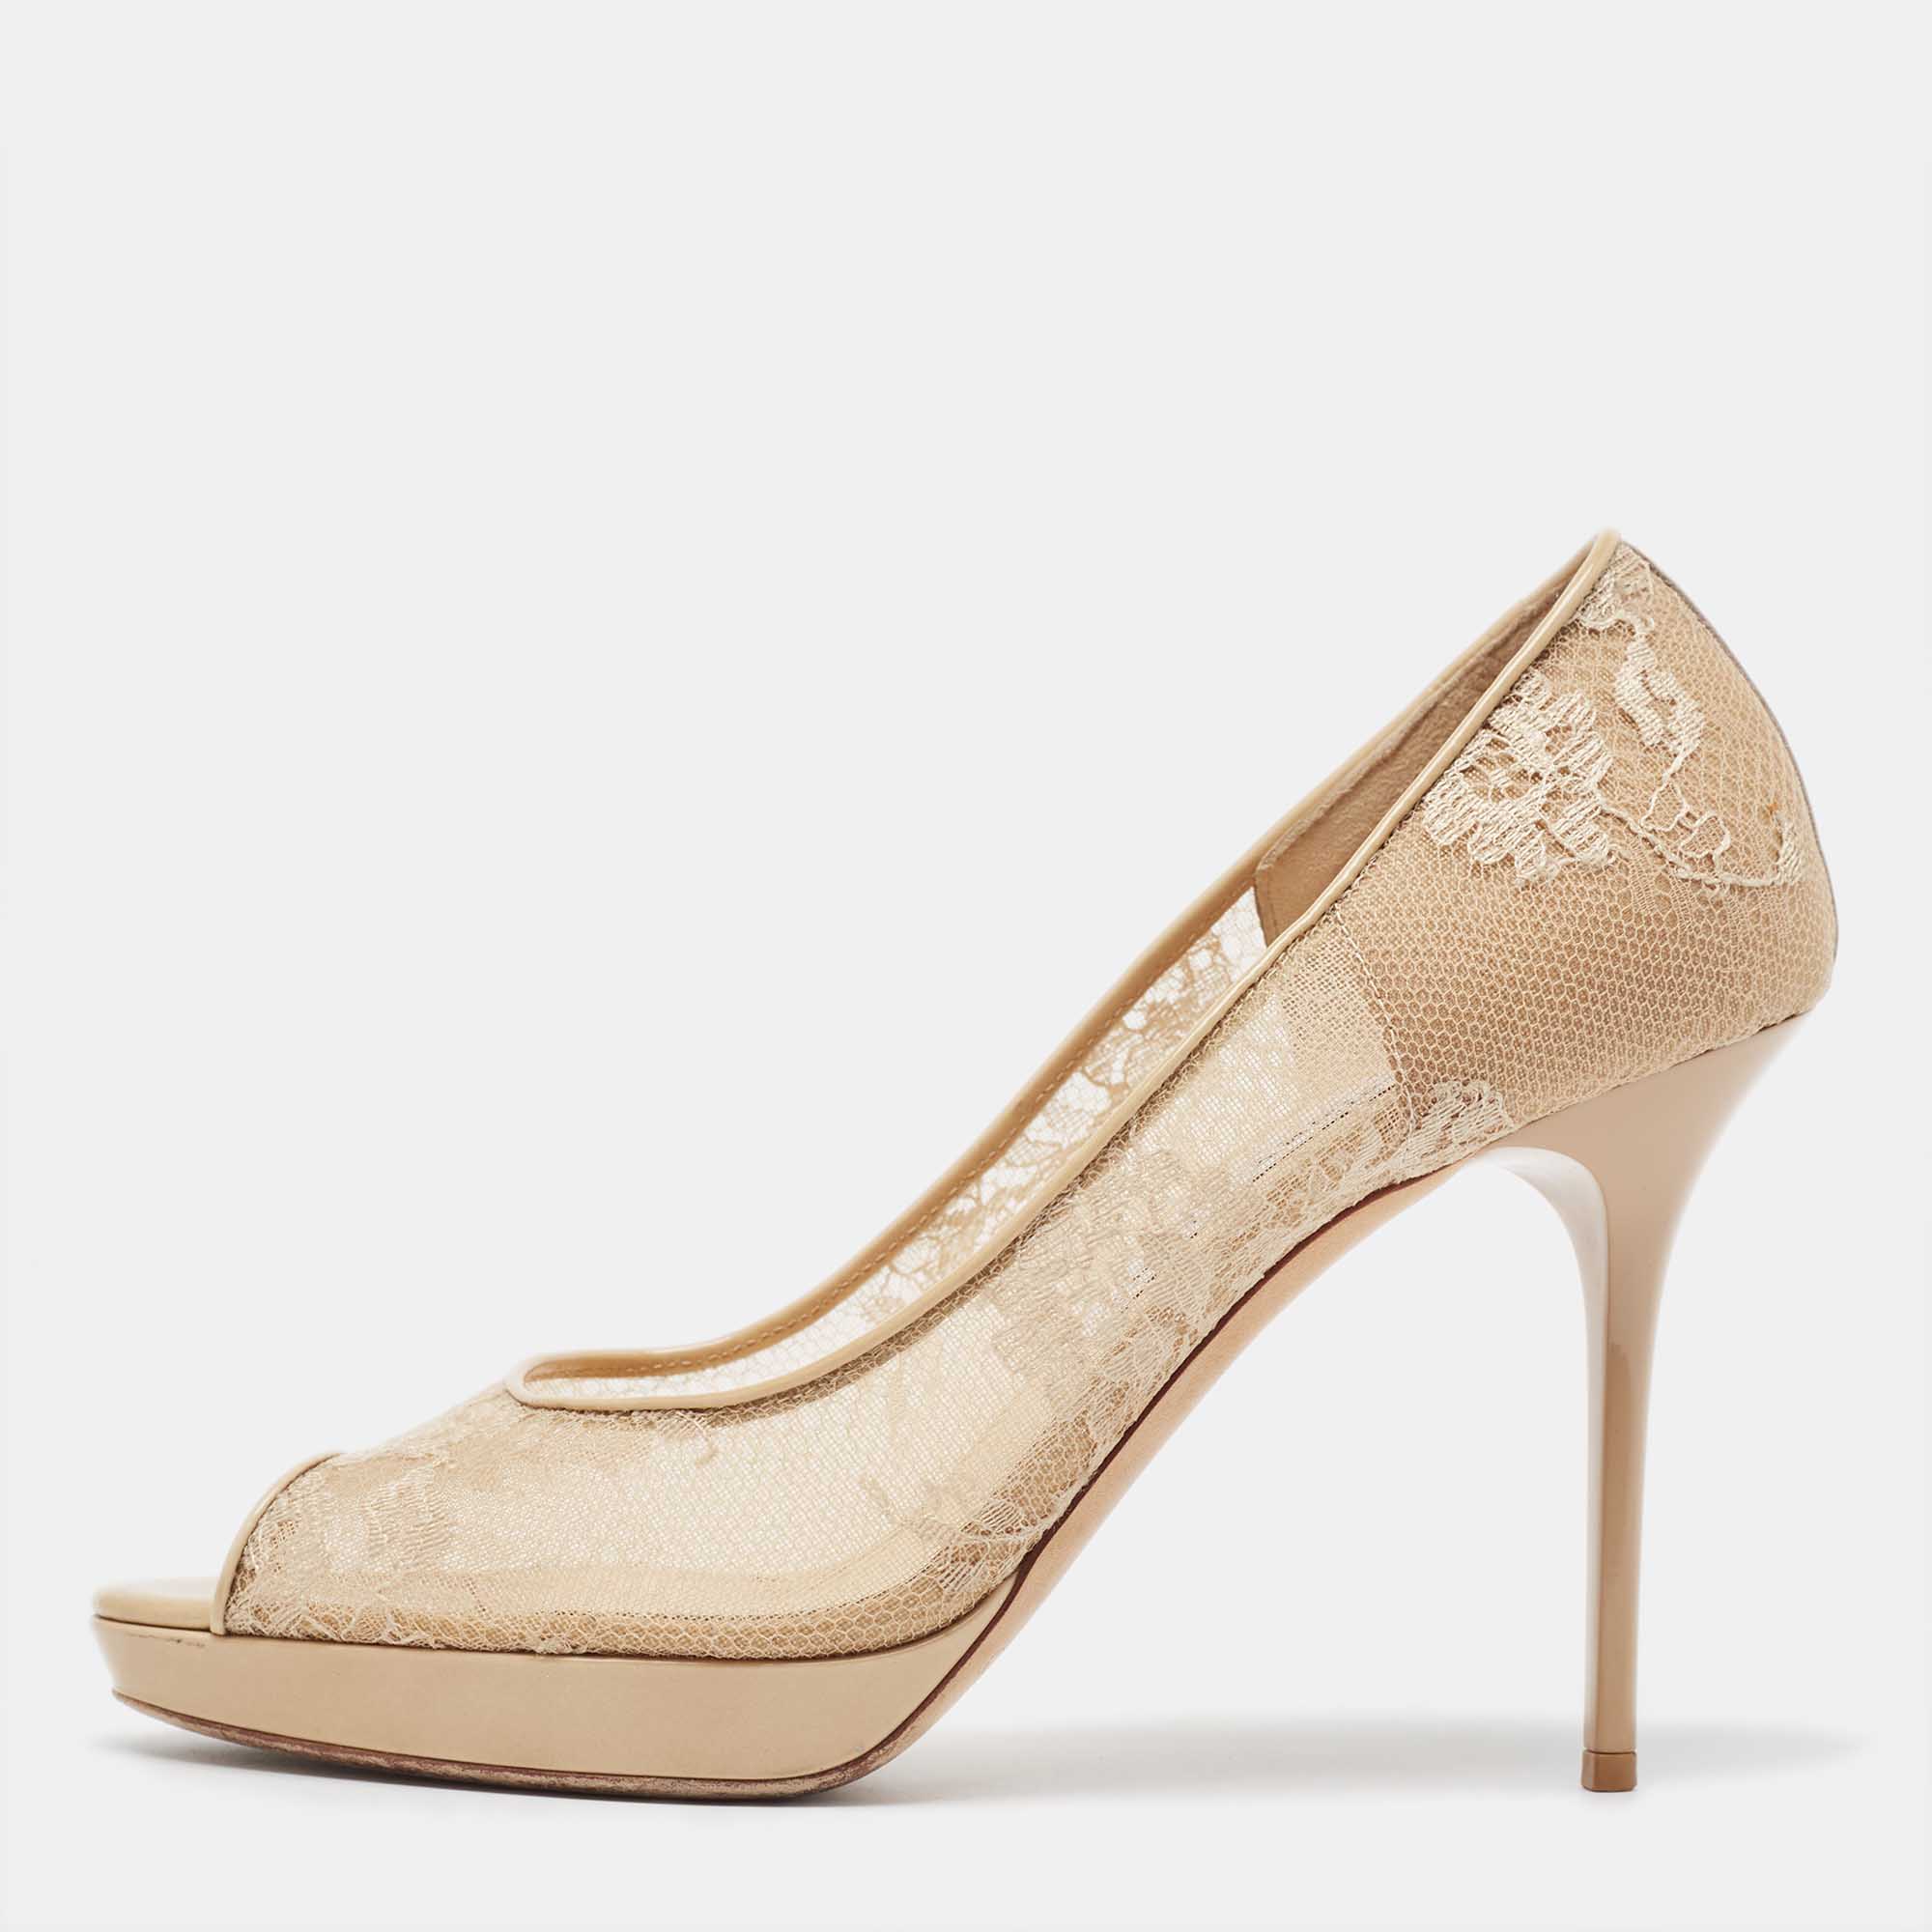 Jimmy choo beige lace and patent leather luna peep toe pumps size 39